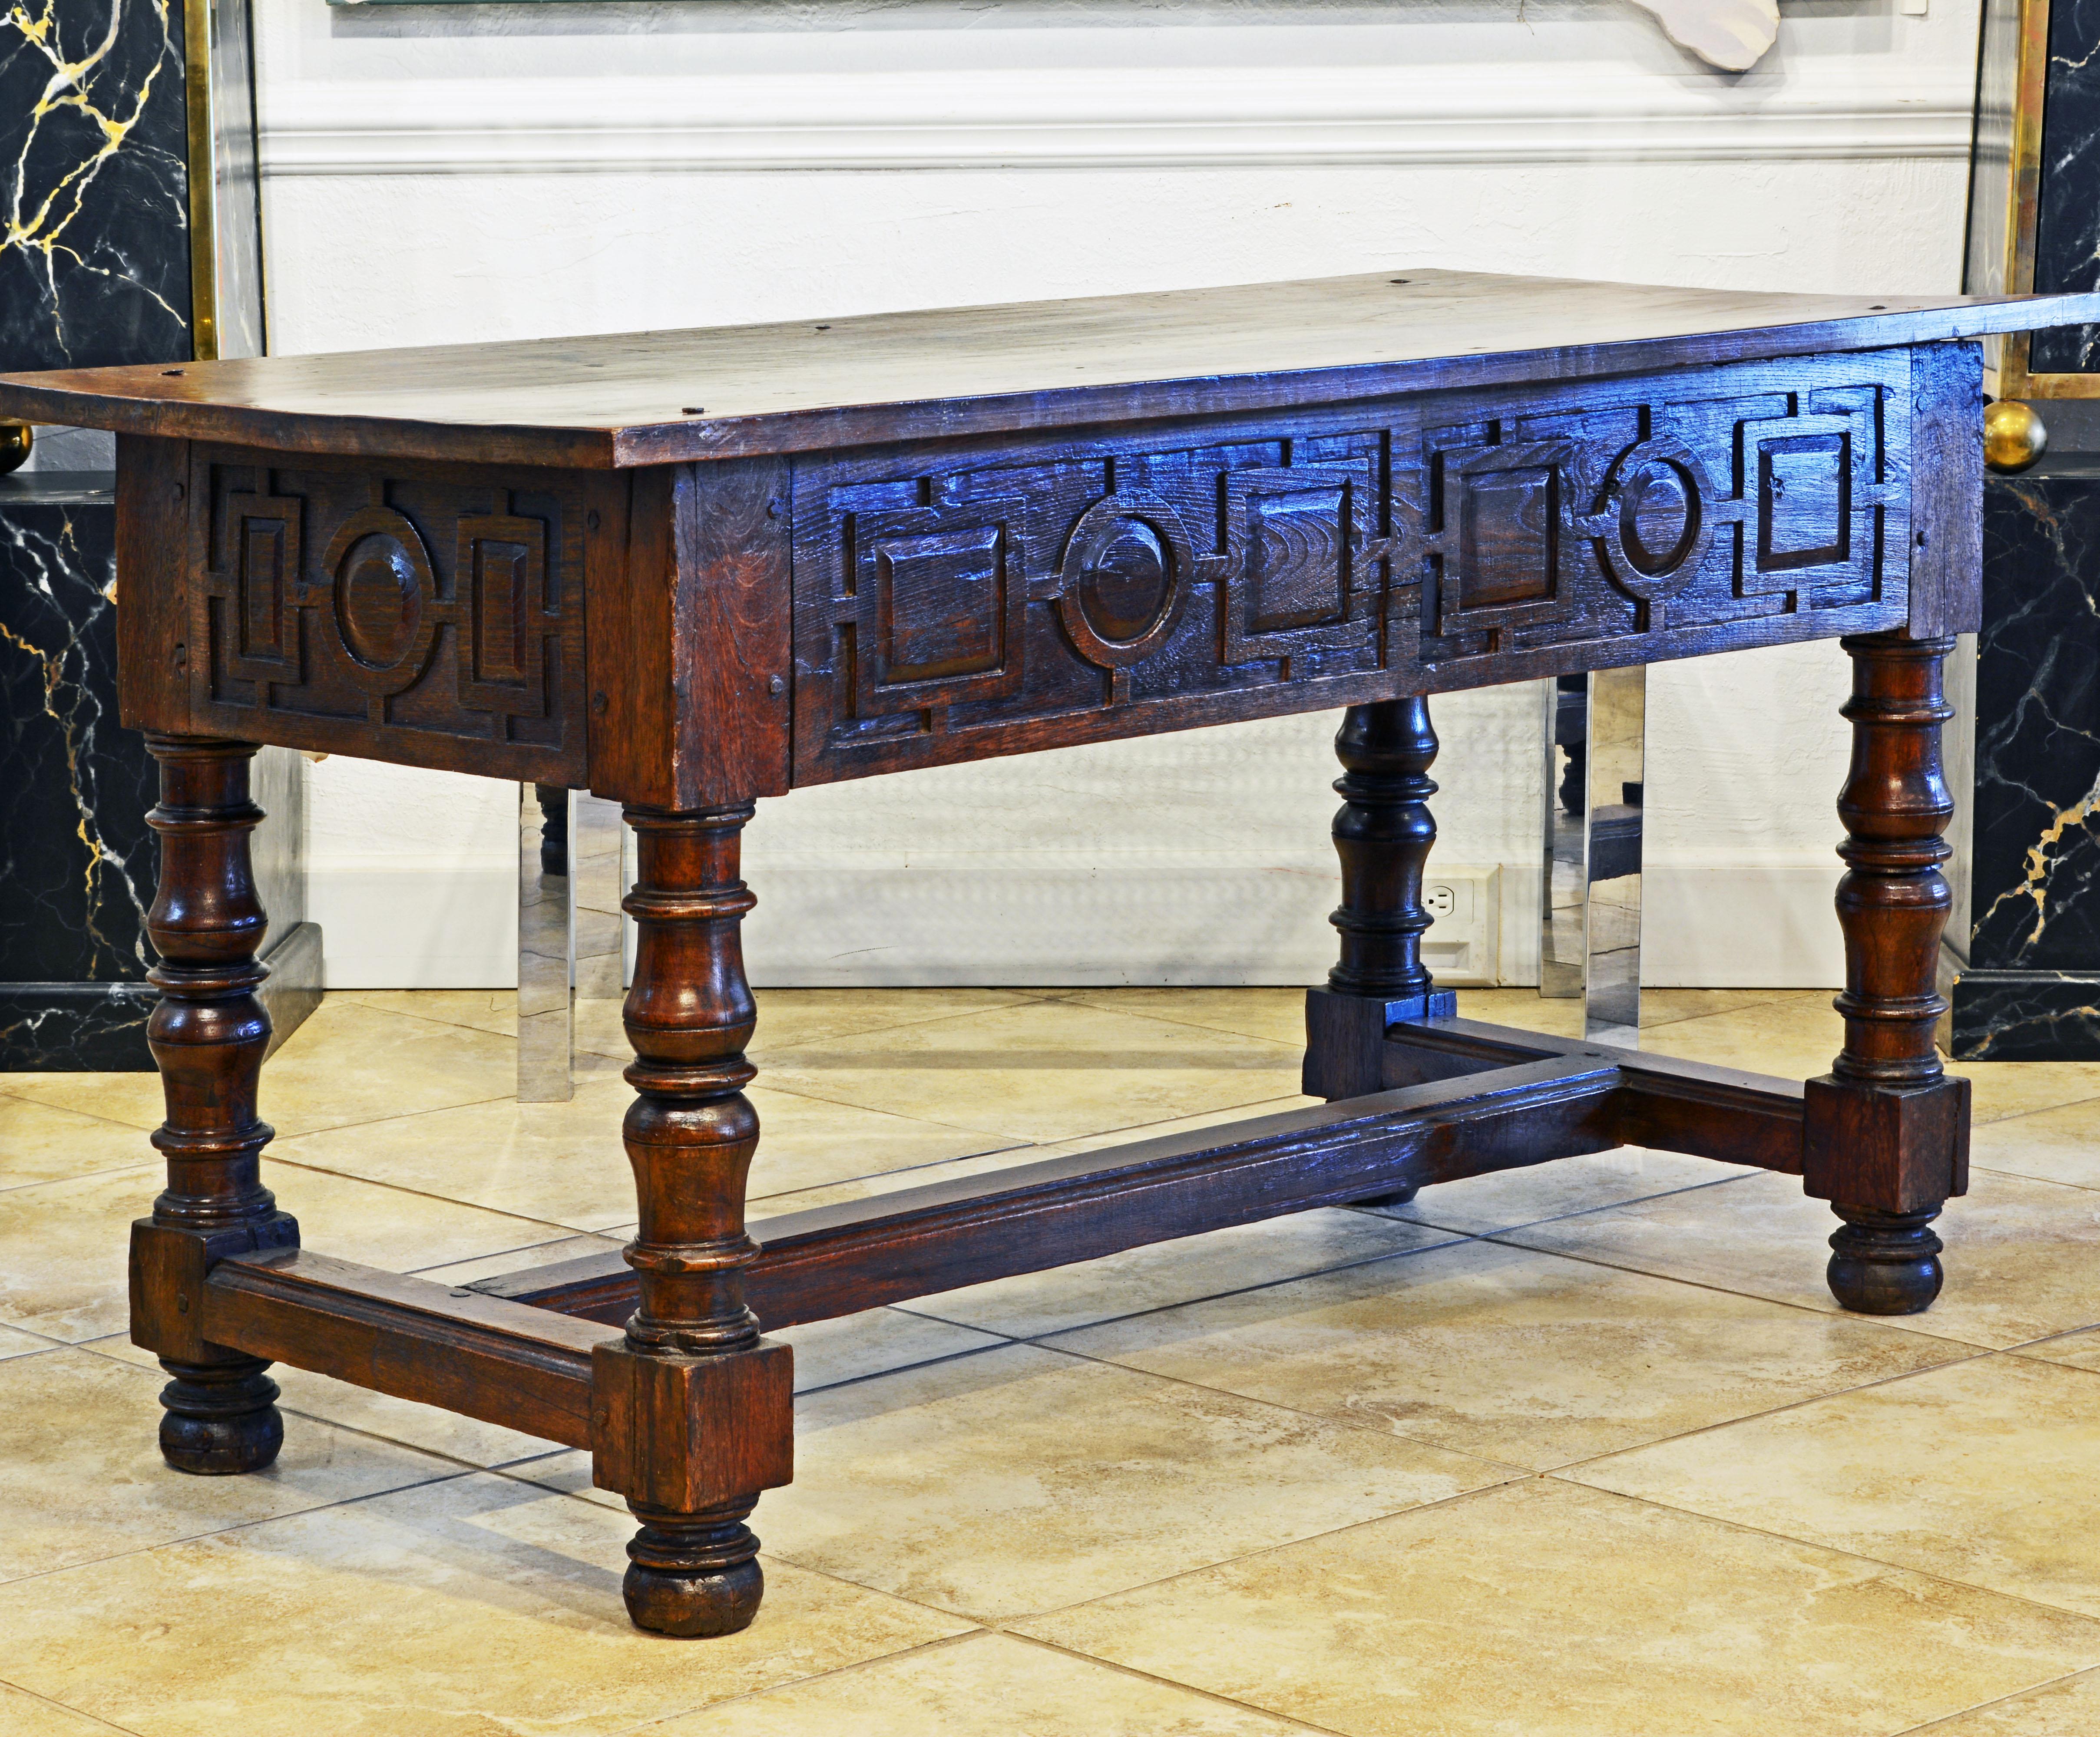 Forged Large 17th-18th Century Spanish Renaissance Walnut Refectory Table or Hall Table